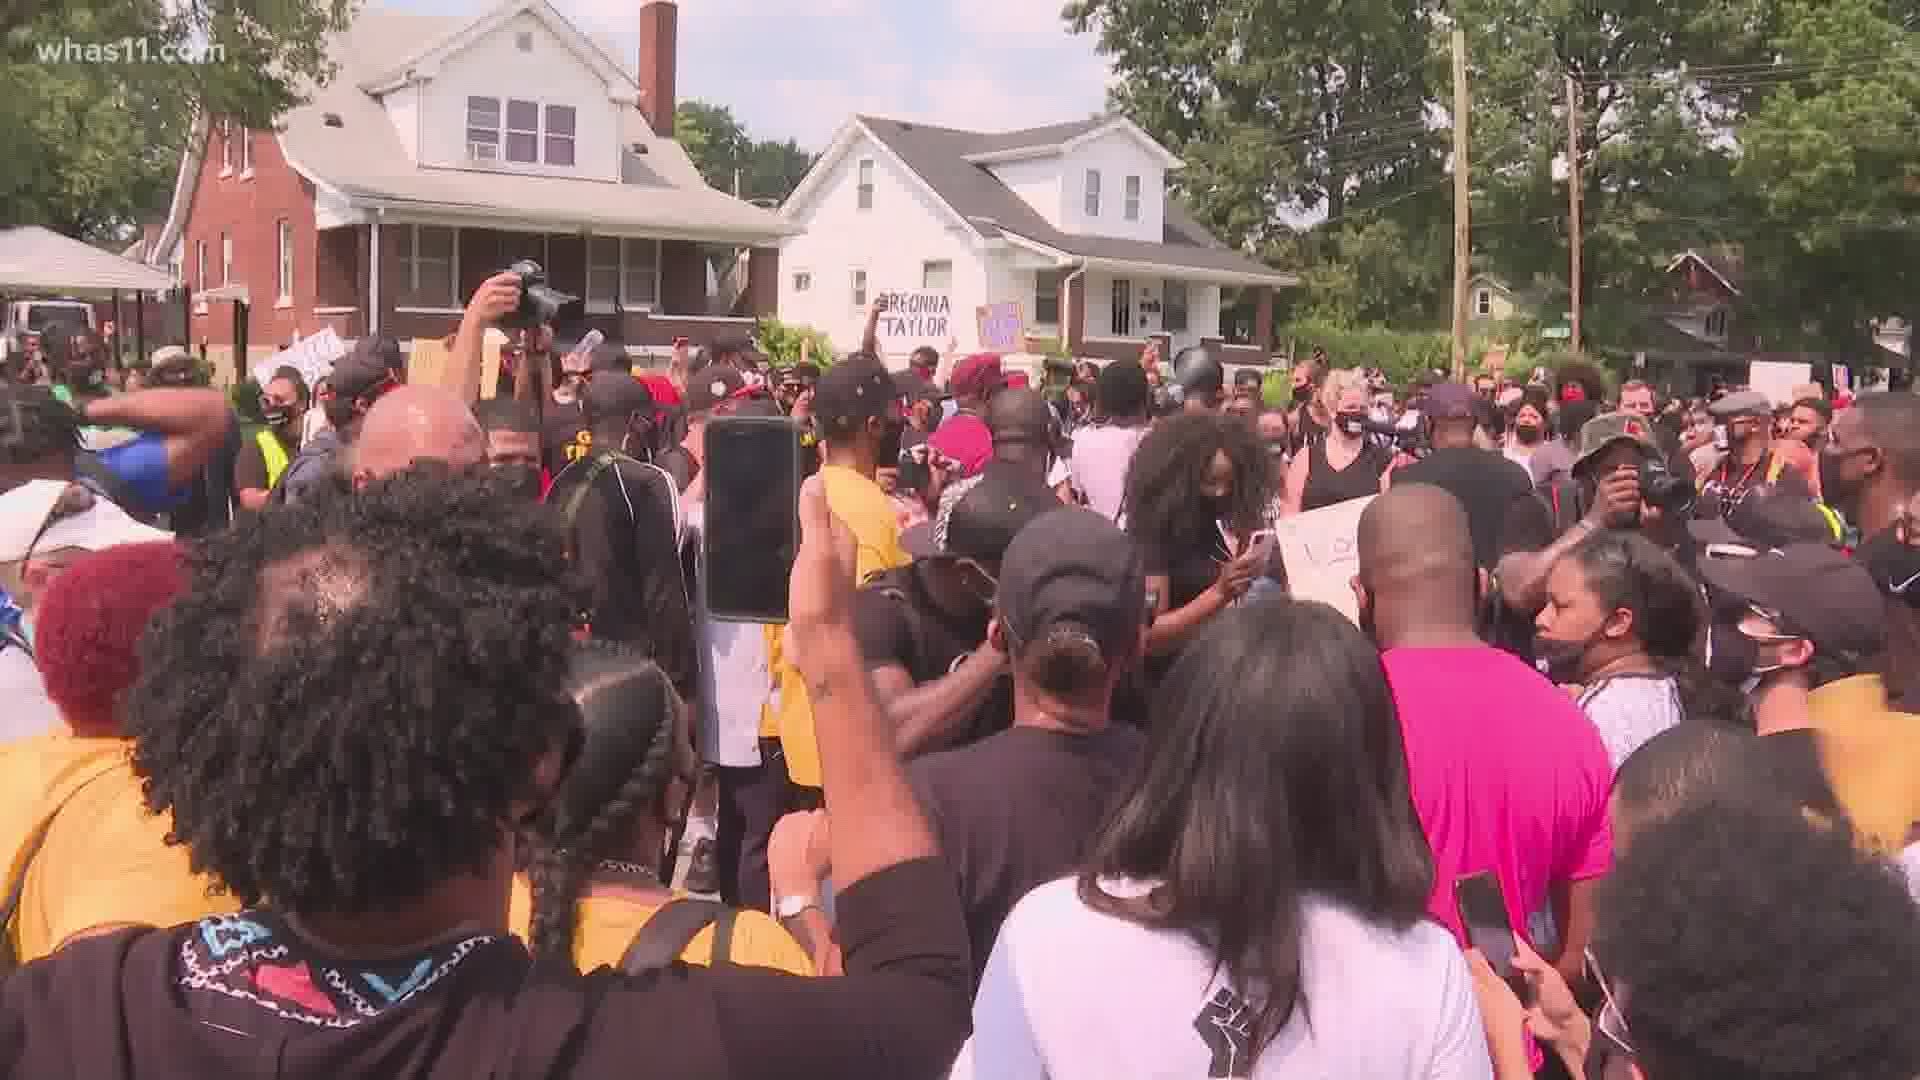 Protesters calling for justice in Breonna Taylor's death marched in South Louisville Tuesday. 68 protesters were arrested, police say.